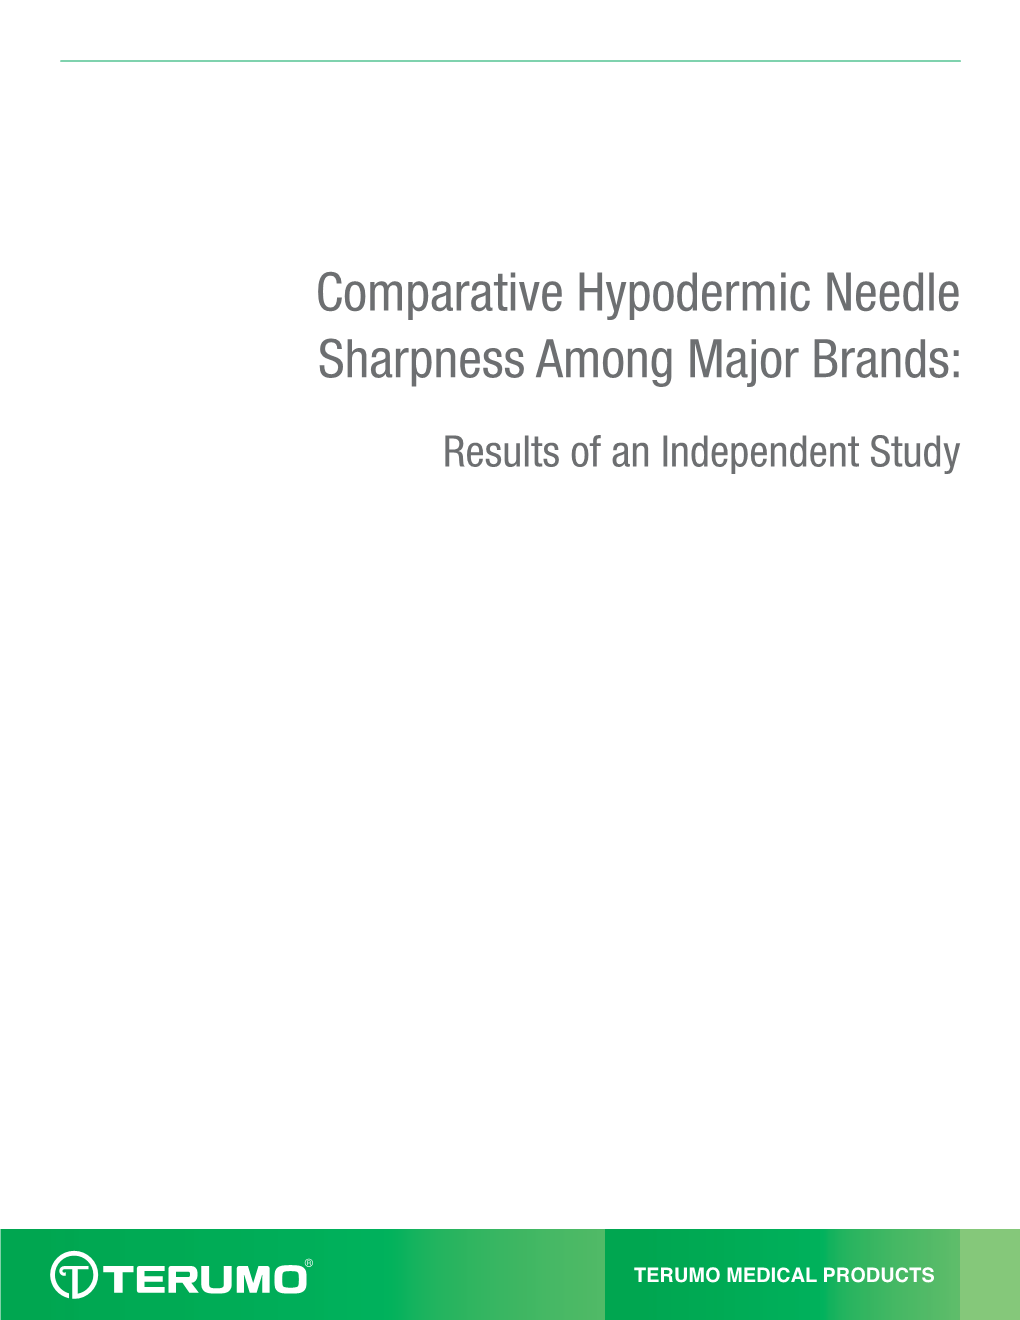 Comparative Hypodermic Needle Sharpness Among Major Brands